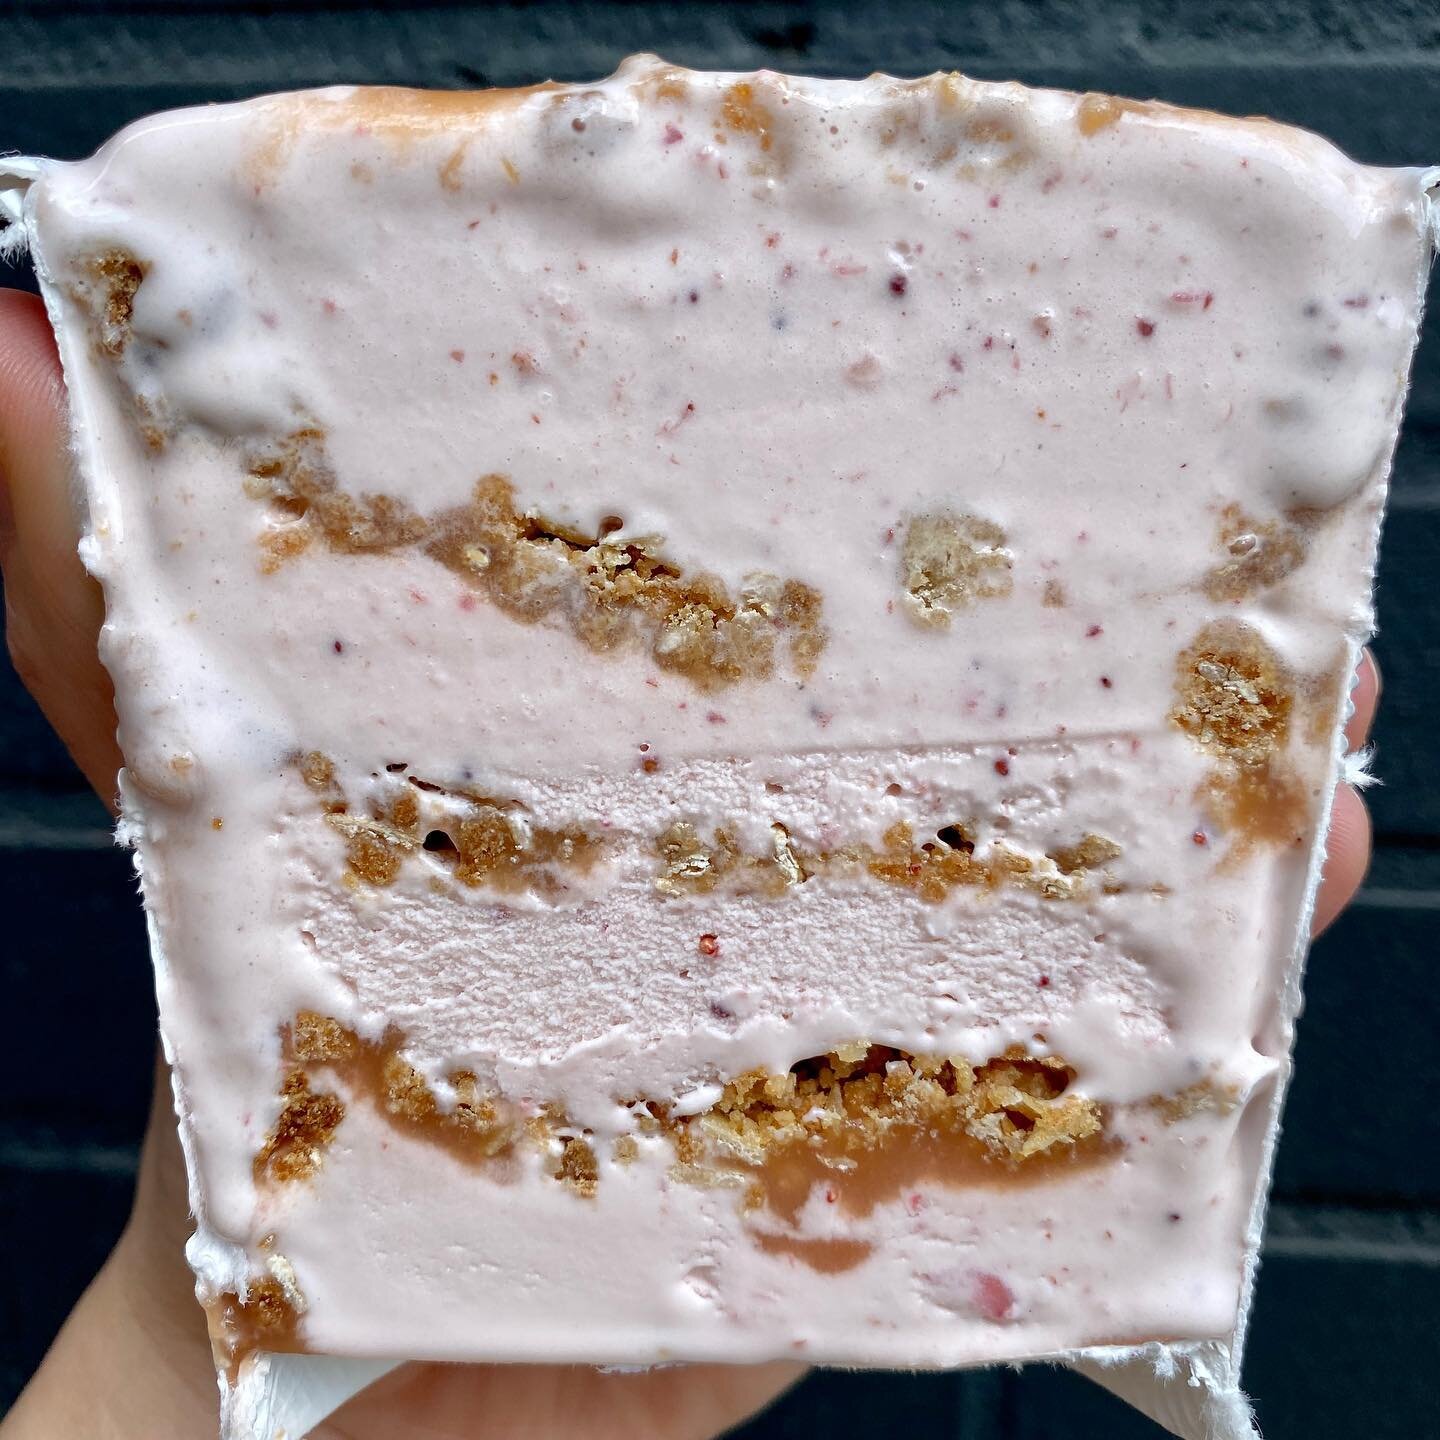 Cross shot of a pint of our Strawberry Rhubarb Crisp! We spent all day making this flavor for you guys!!

Strawberry ice cream, rhubarb jam, toasted oat crumble deliciousness. 🍓Oh yeah, we&rsquo;ve got a vegan version, too. 😋

Swing by for scoops a